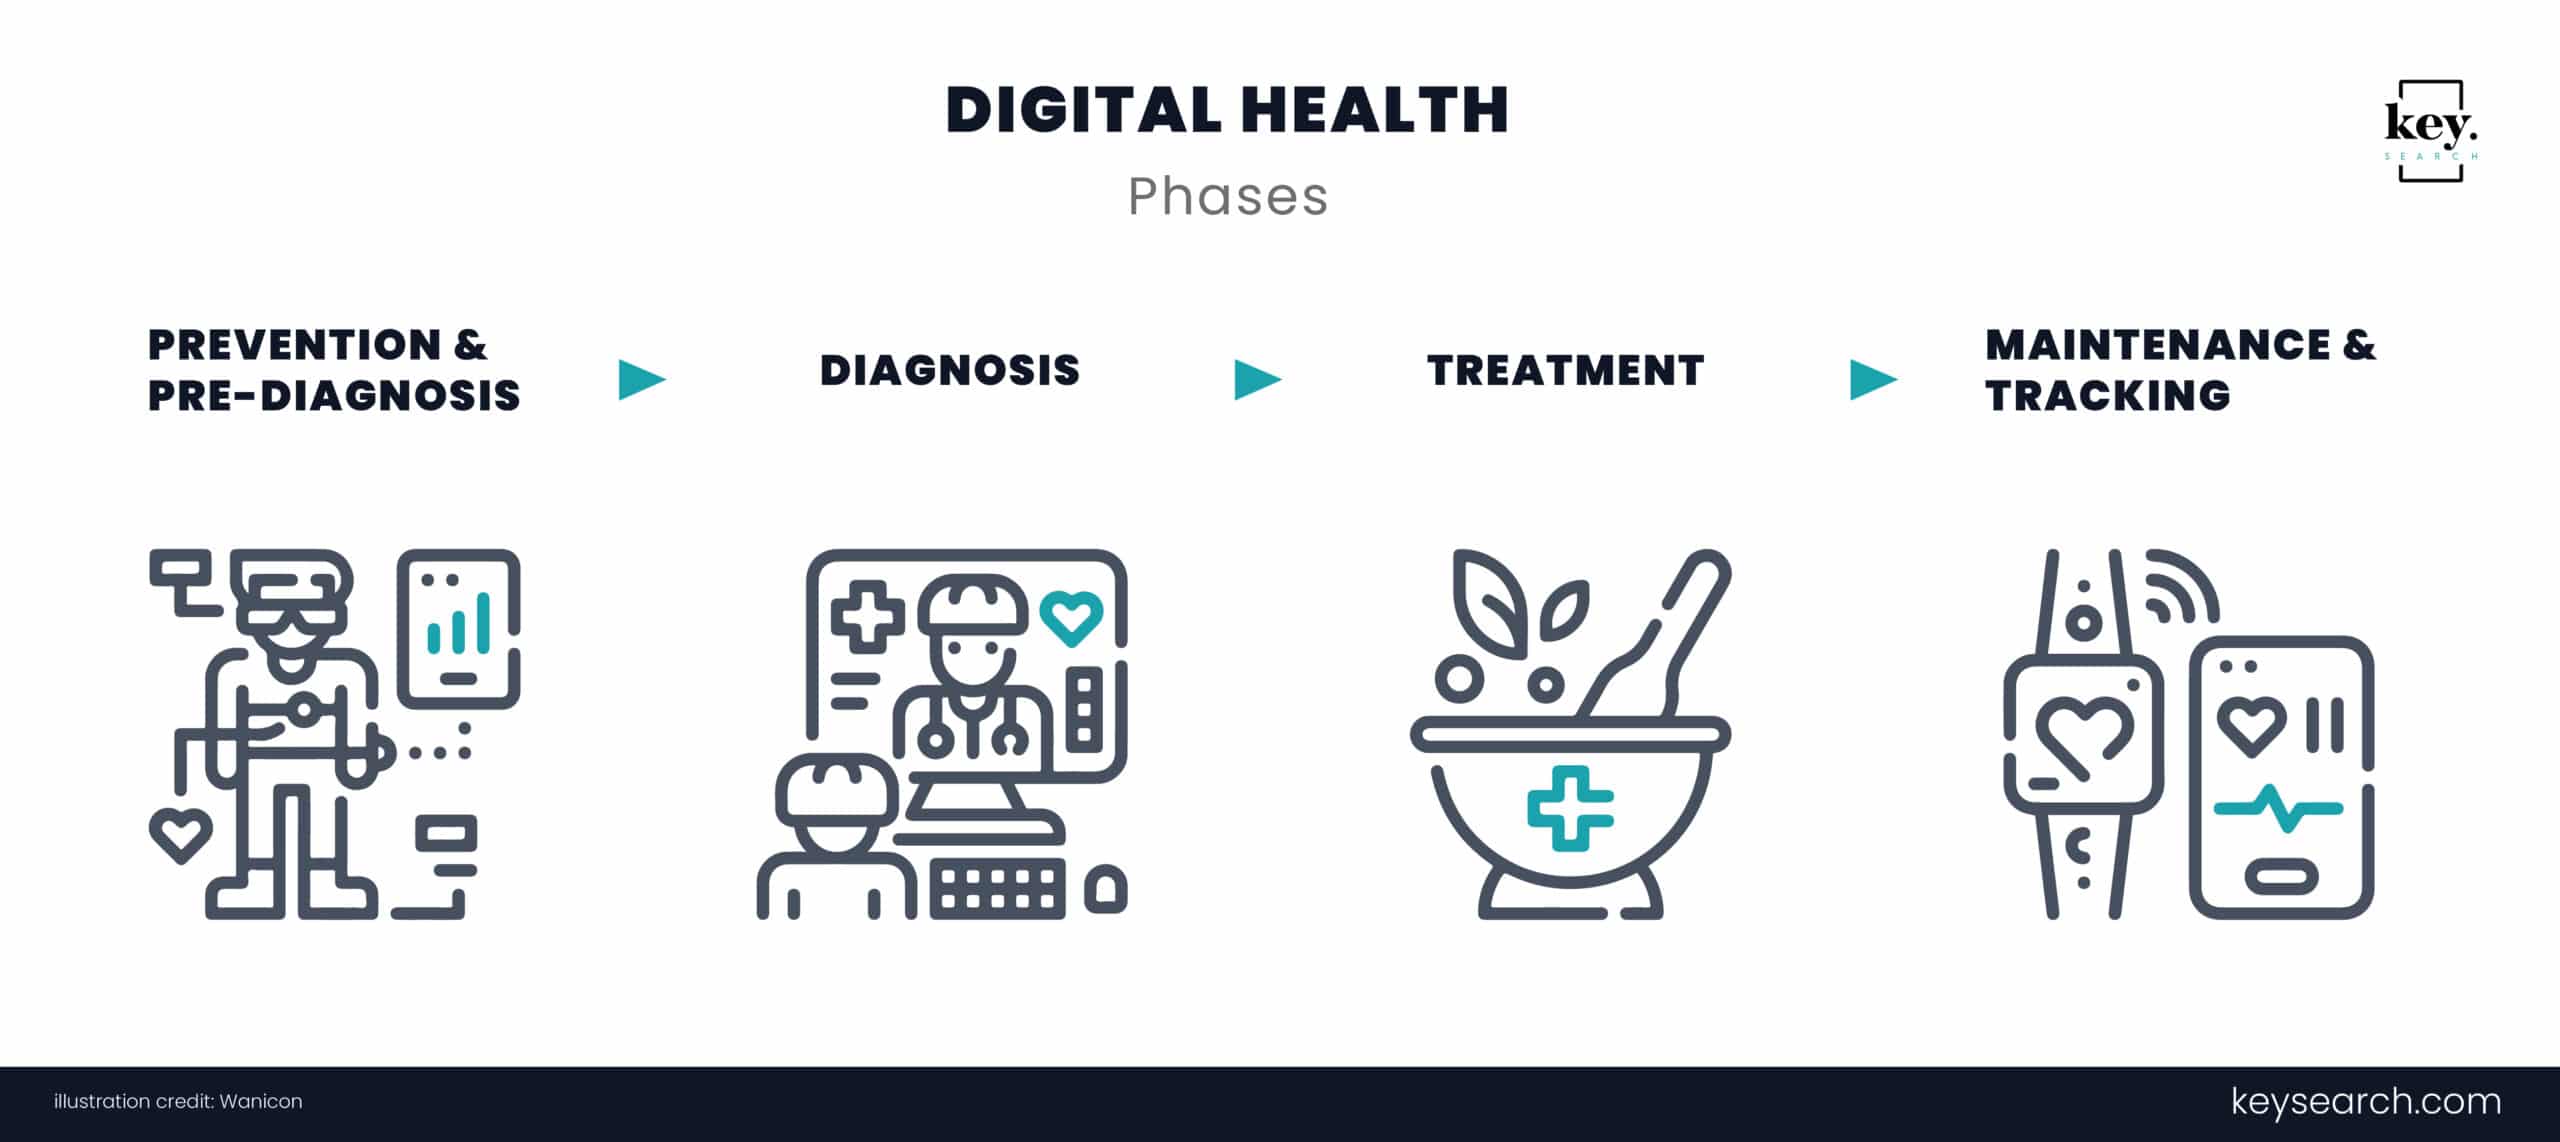 Phases of the Digital Health